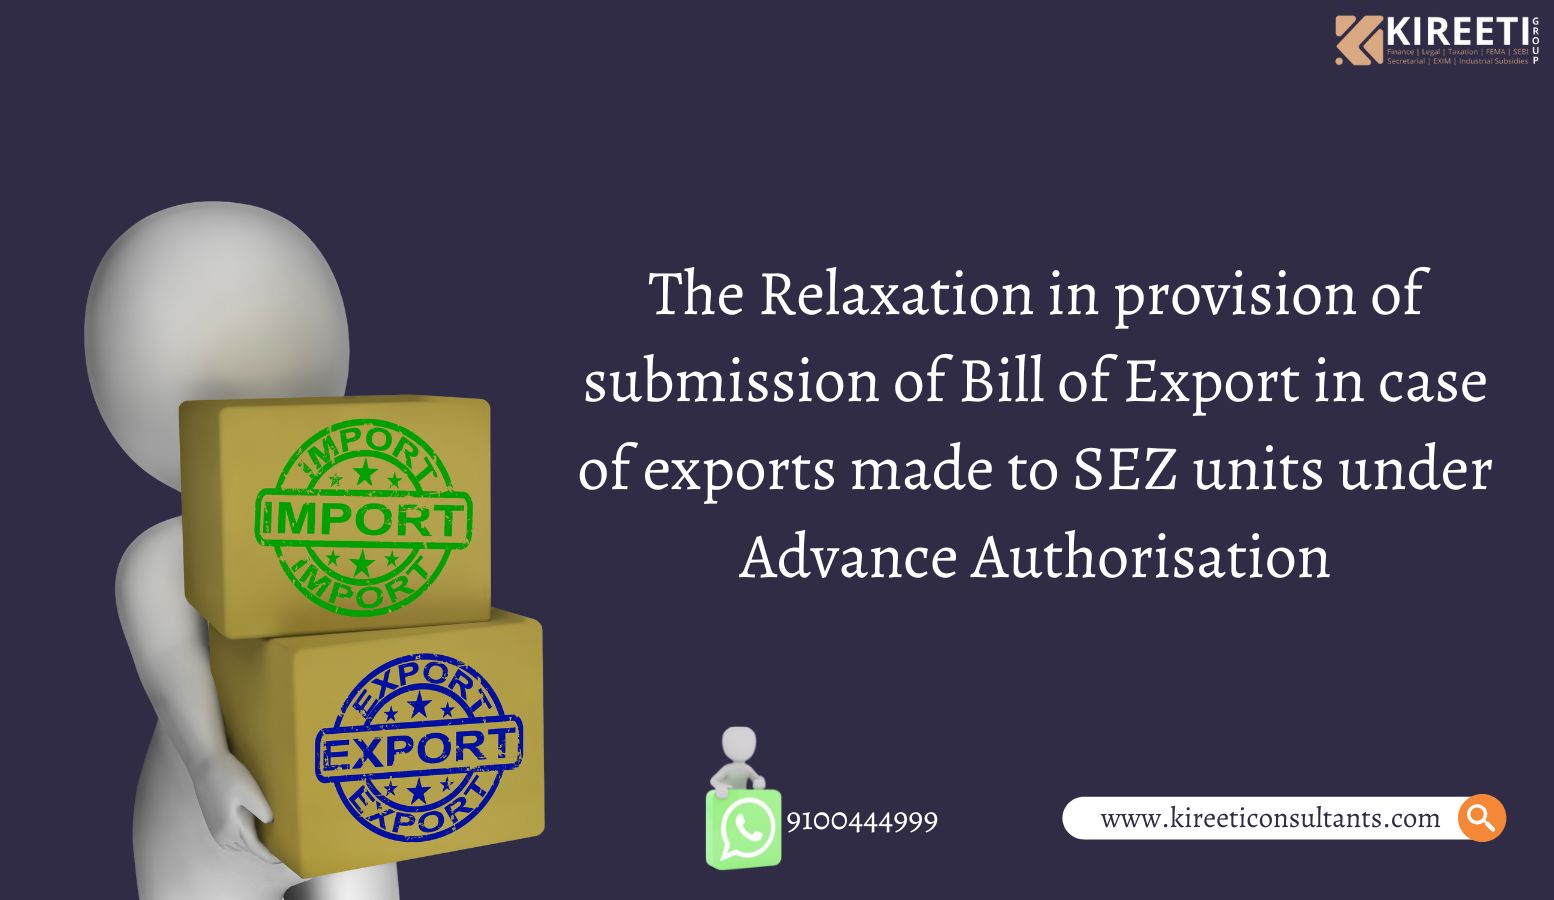 Relaxation, Provision, Bill of Export, SEZ, Advance Authorisation, Exports, Special economic zone